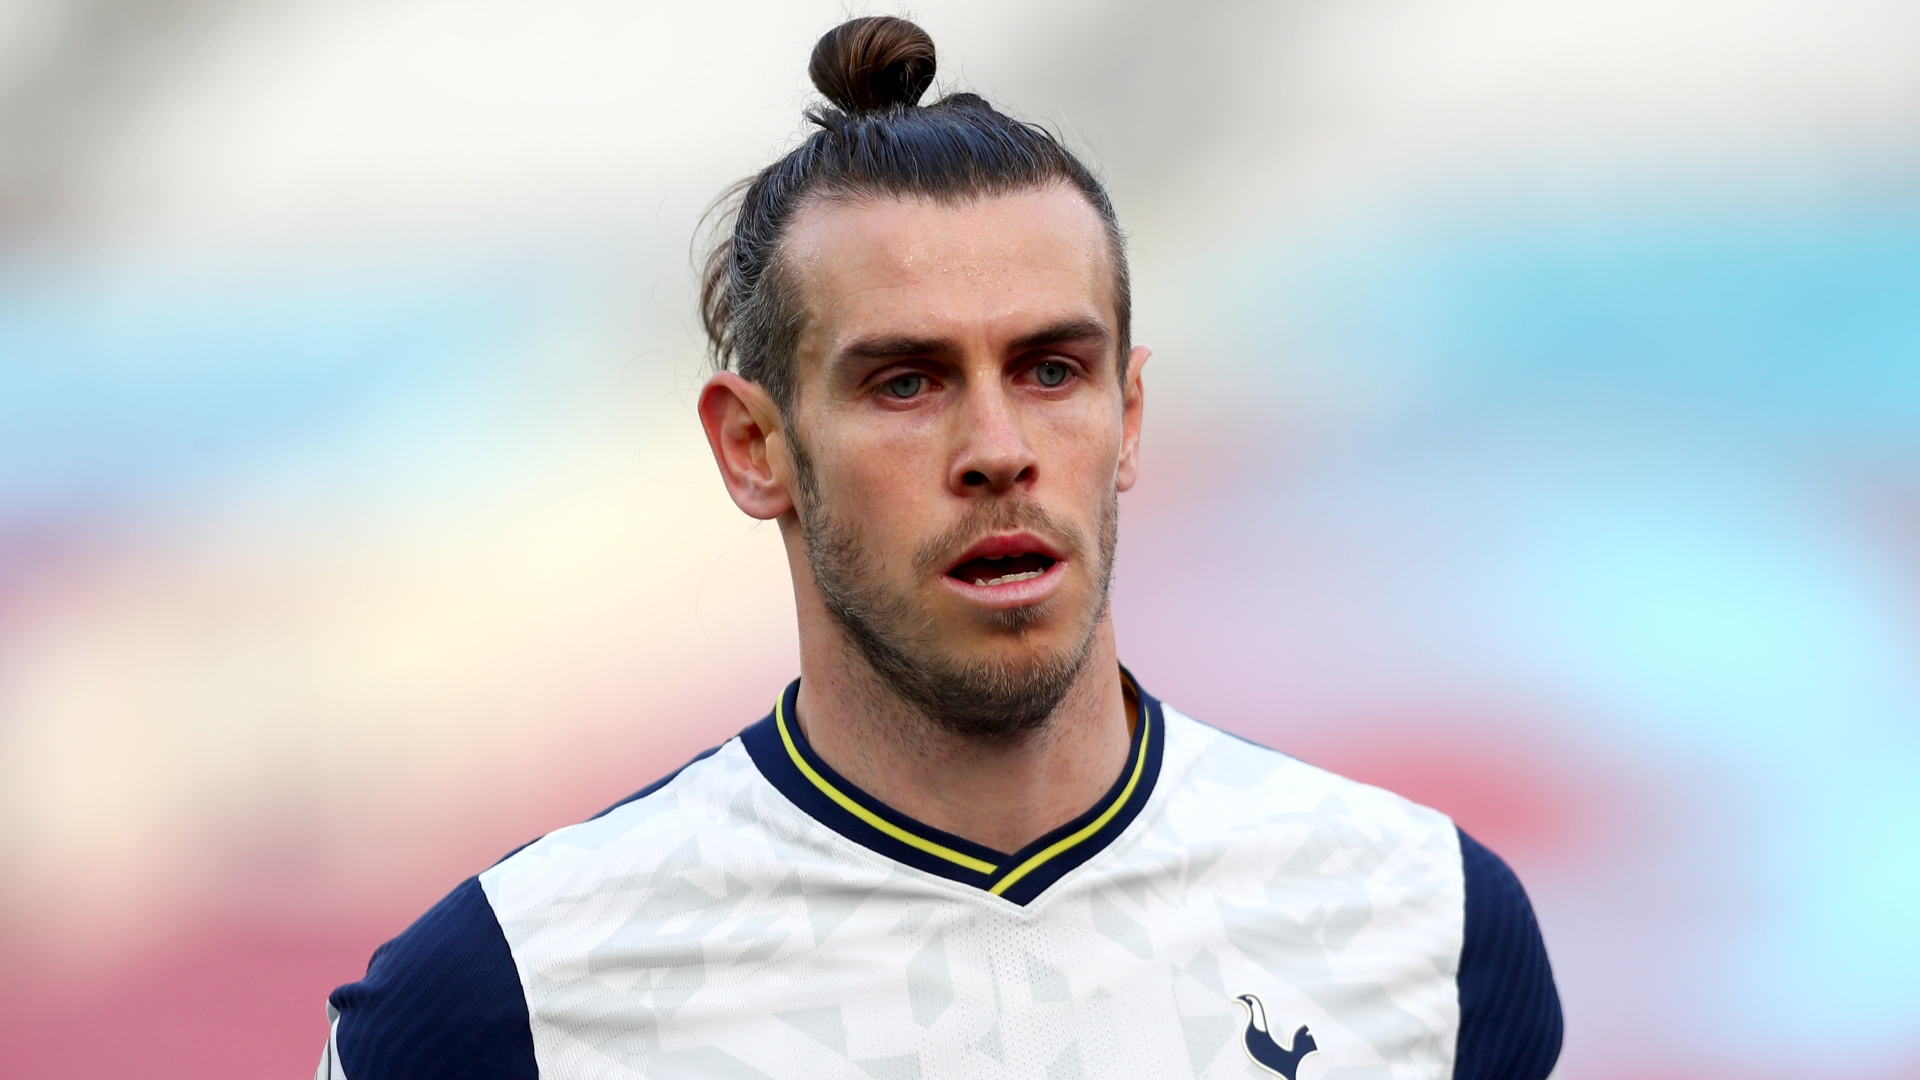 Gareth Bale has produced two consecutive positive performances for Tottenham, leading to a supportive declaration from Jose Mourinho.